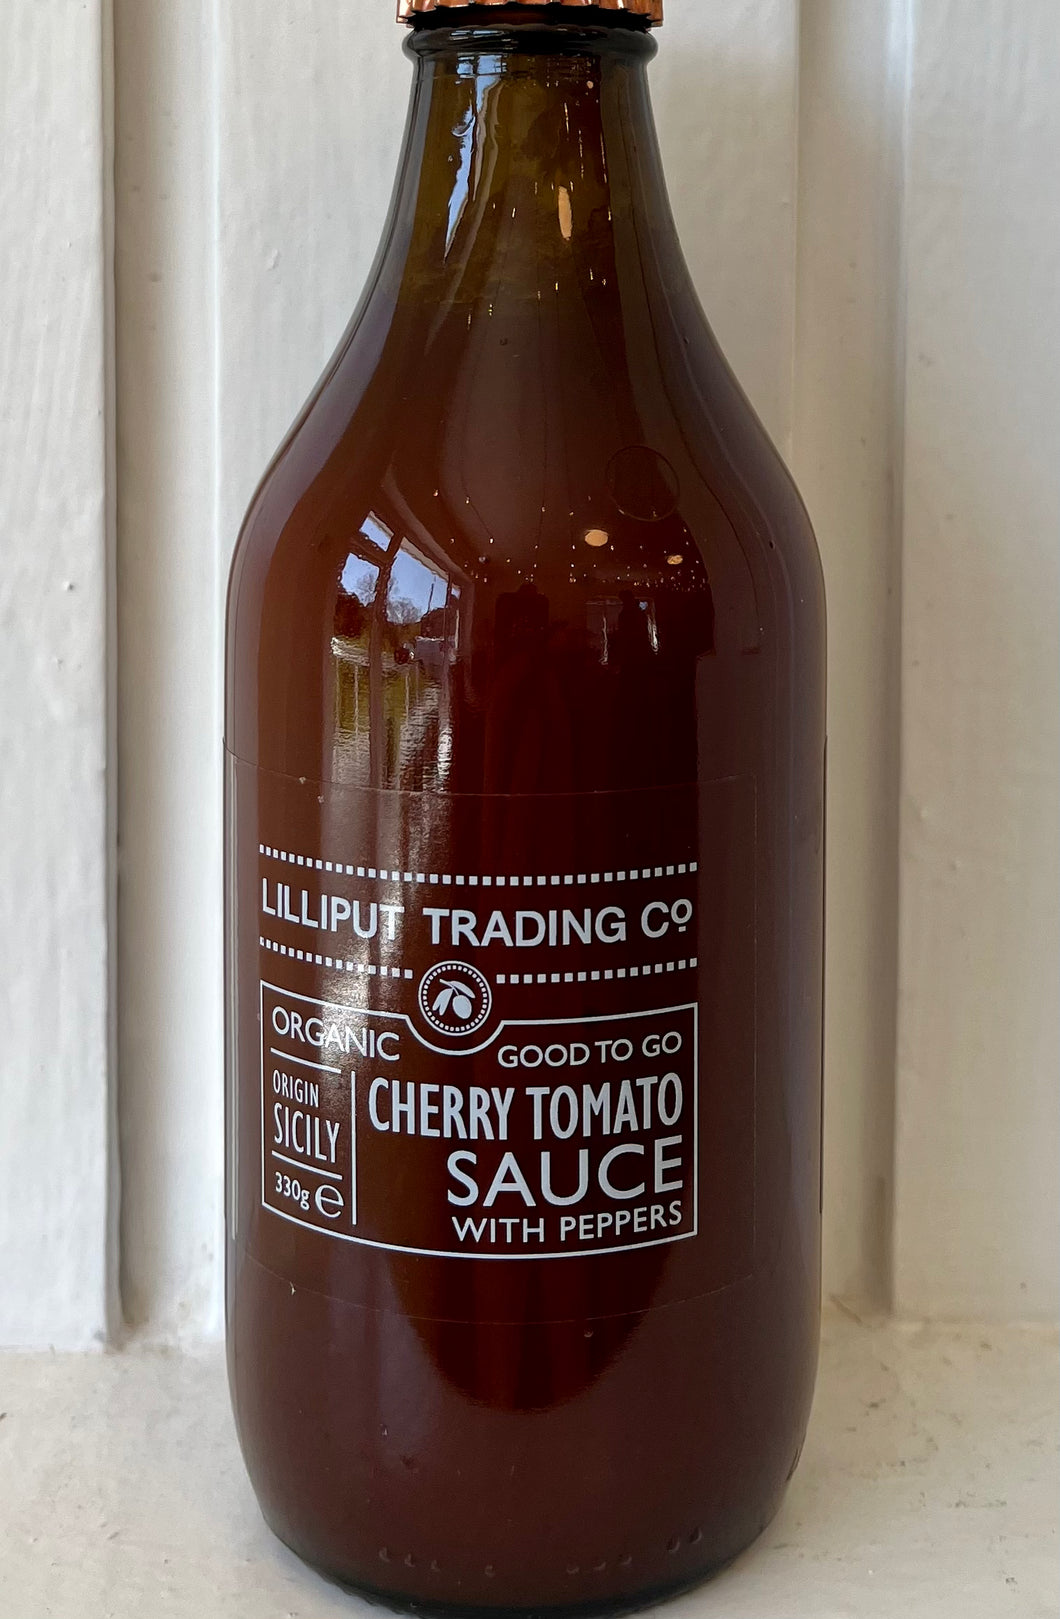 Organic Cherry Tomato Sauce with Peppers by Lilliput Trading Co 300g